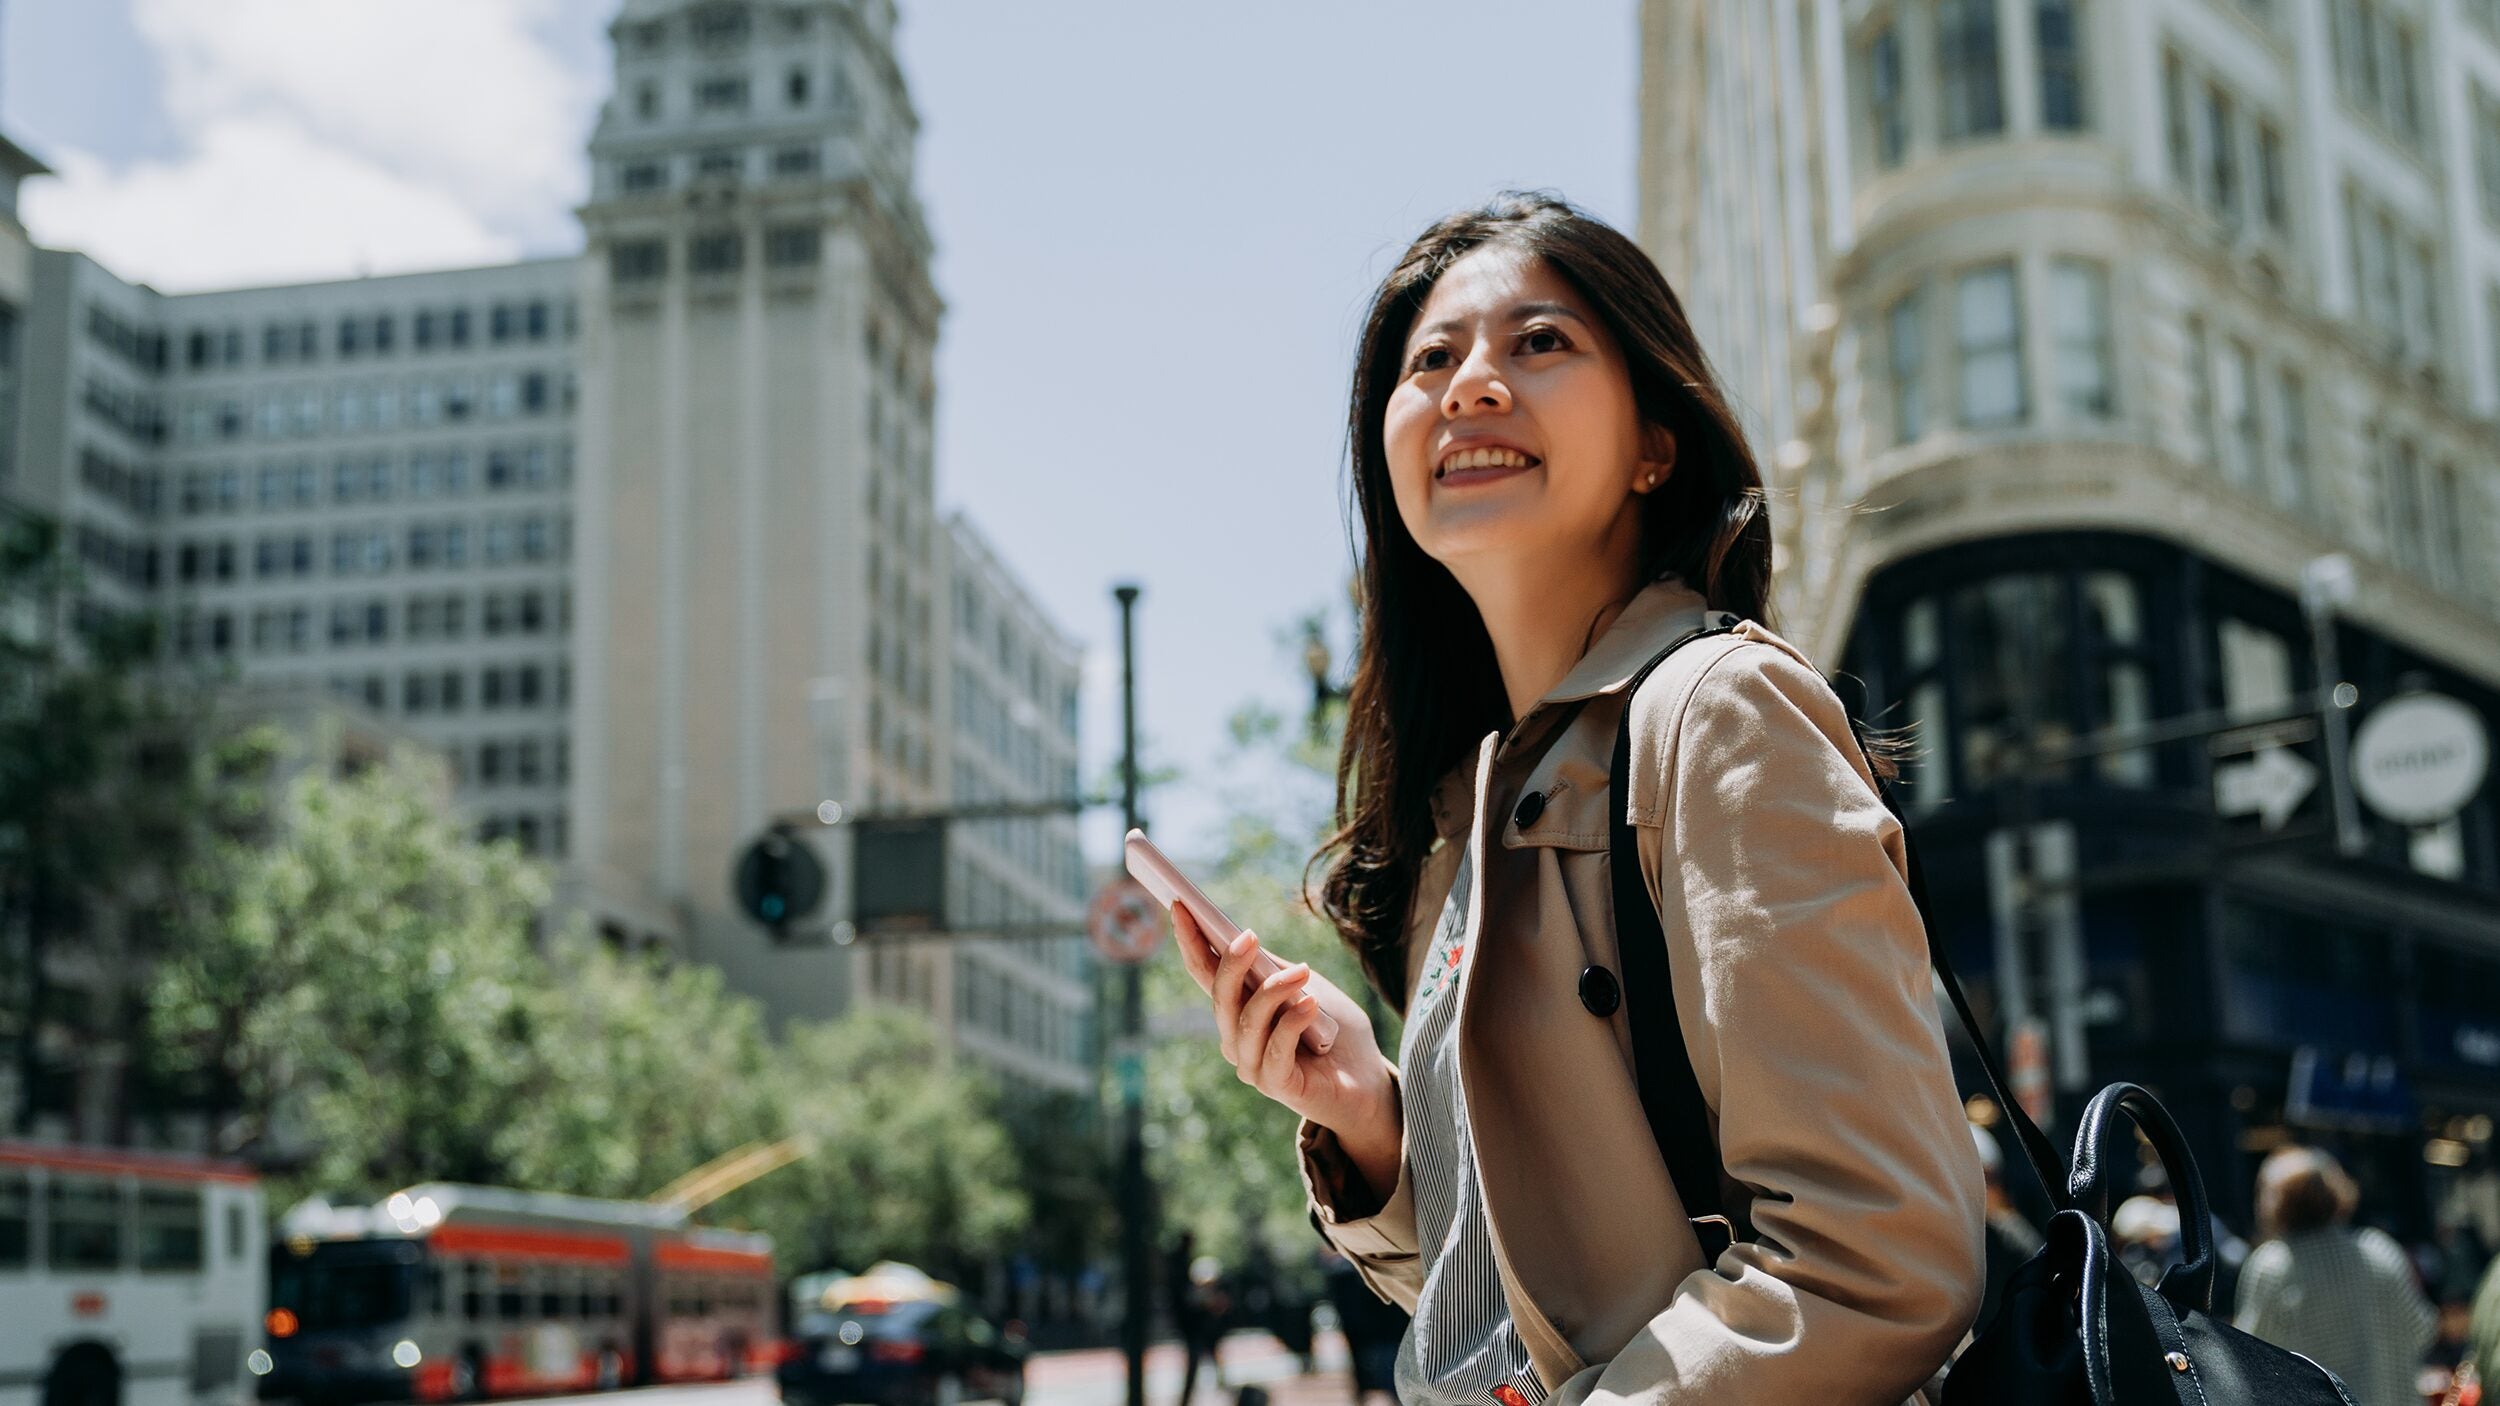 Happy woman holding phone in busy city area in San Francisco.